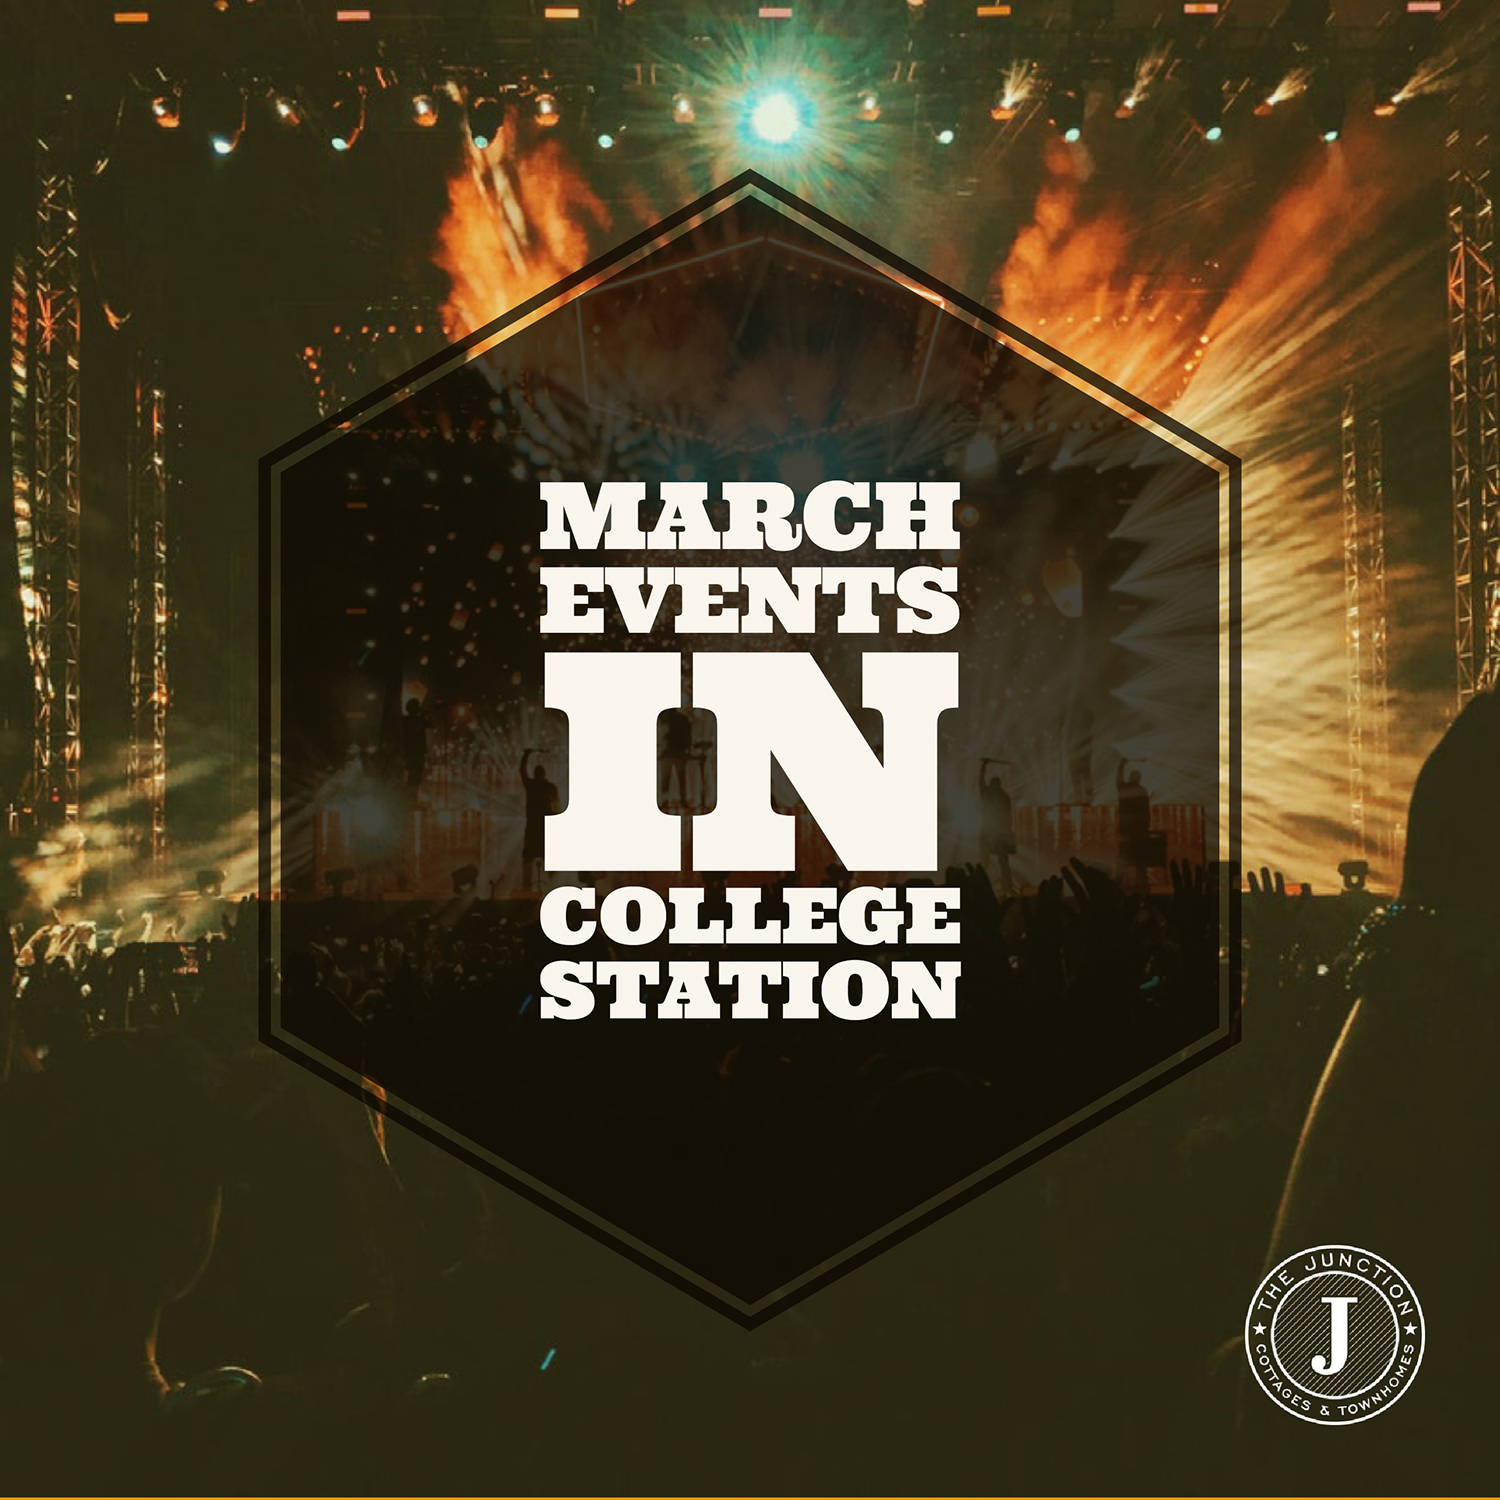 March-Events-in-College-Station.jpg